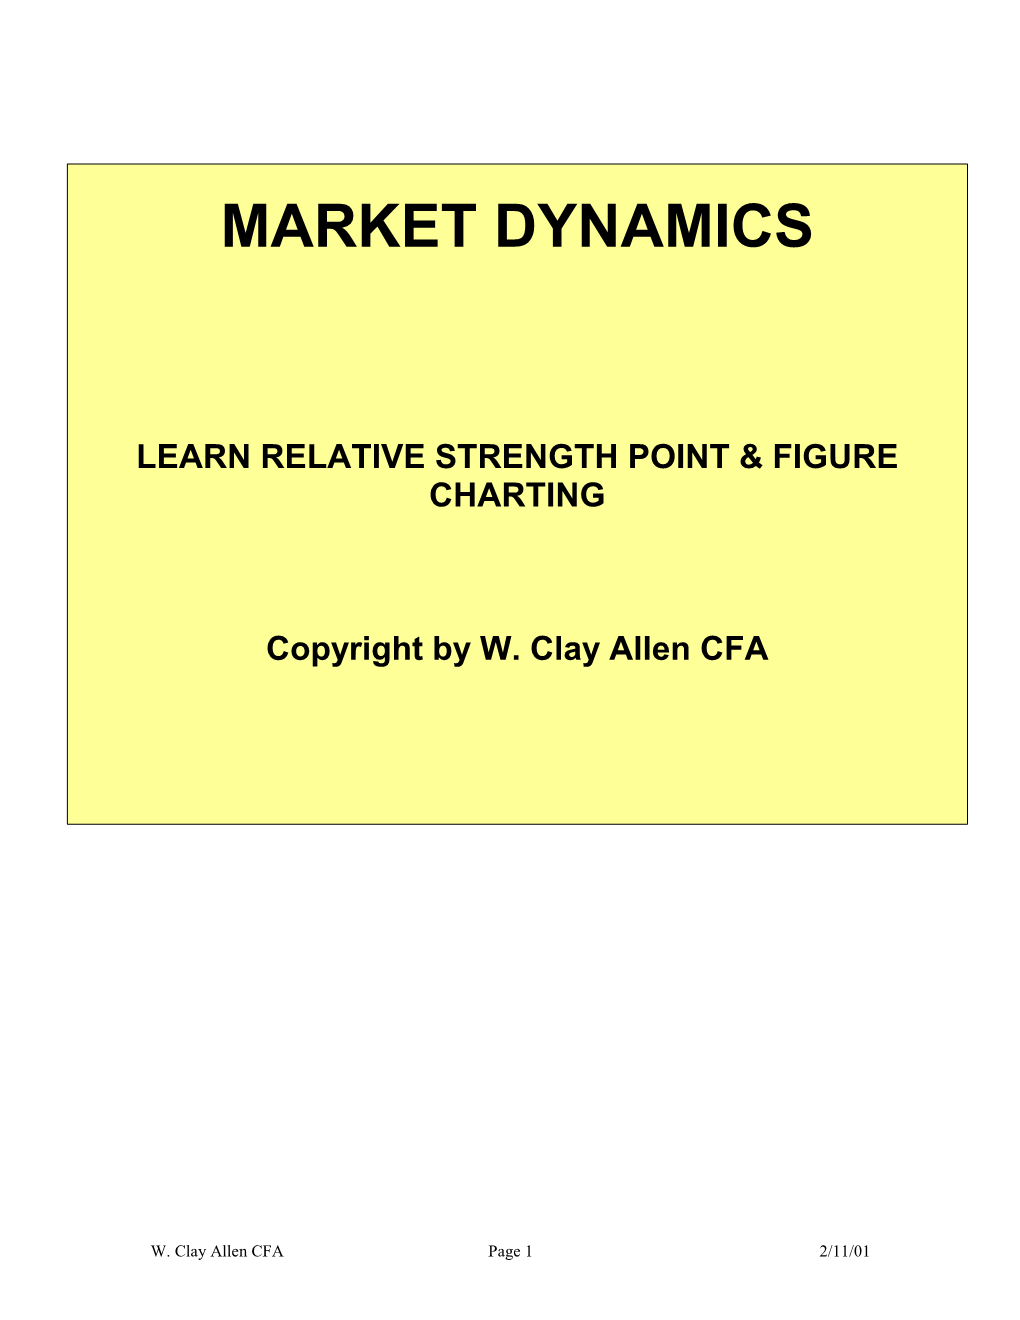 Learn Relative Strength Point and Figure Charting